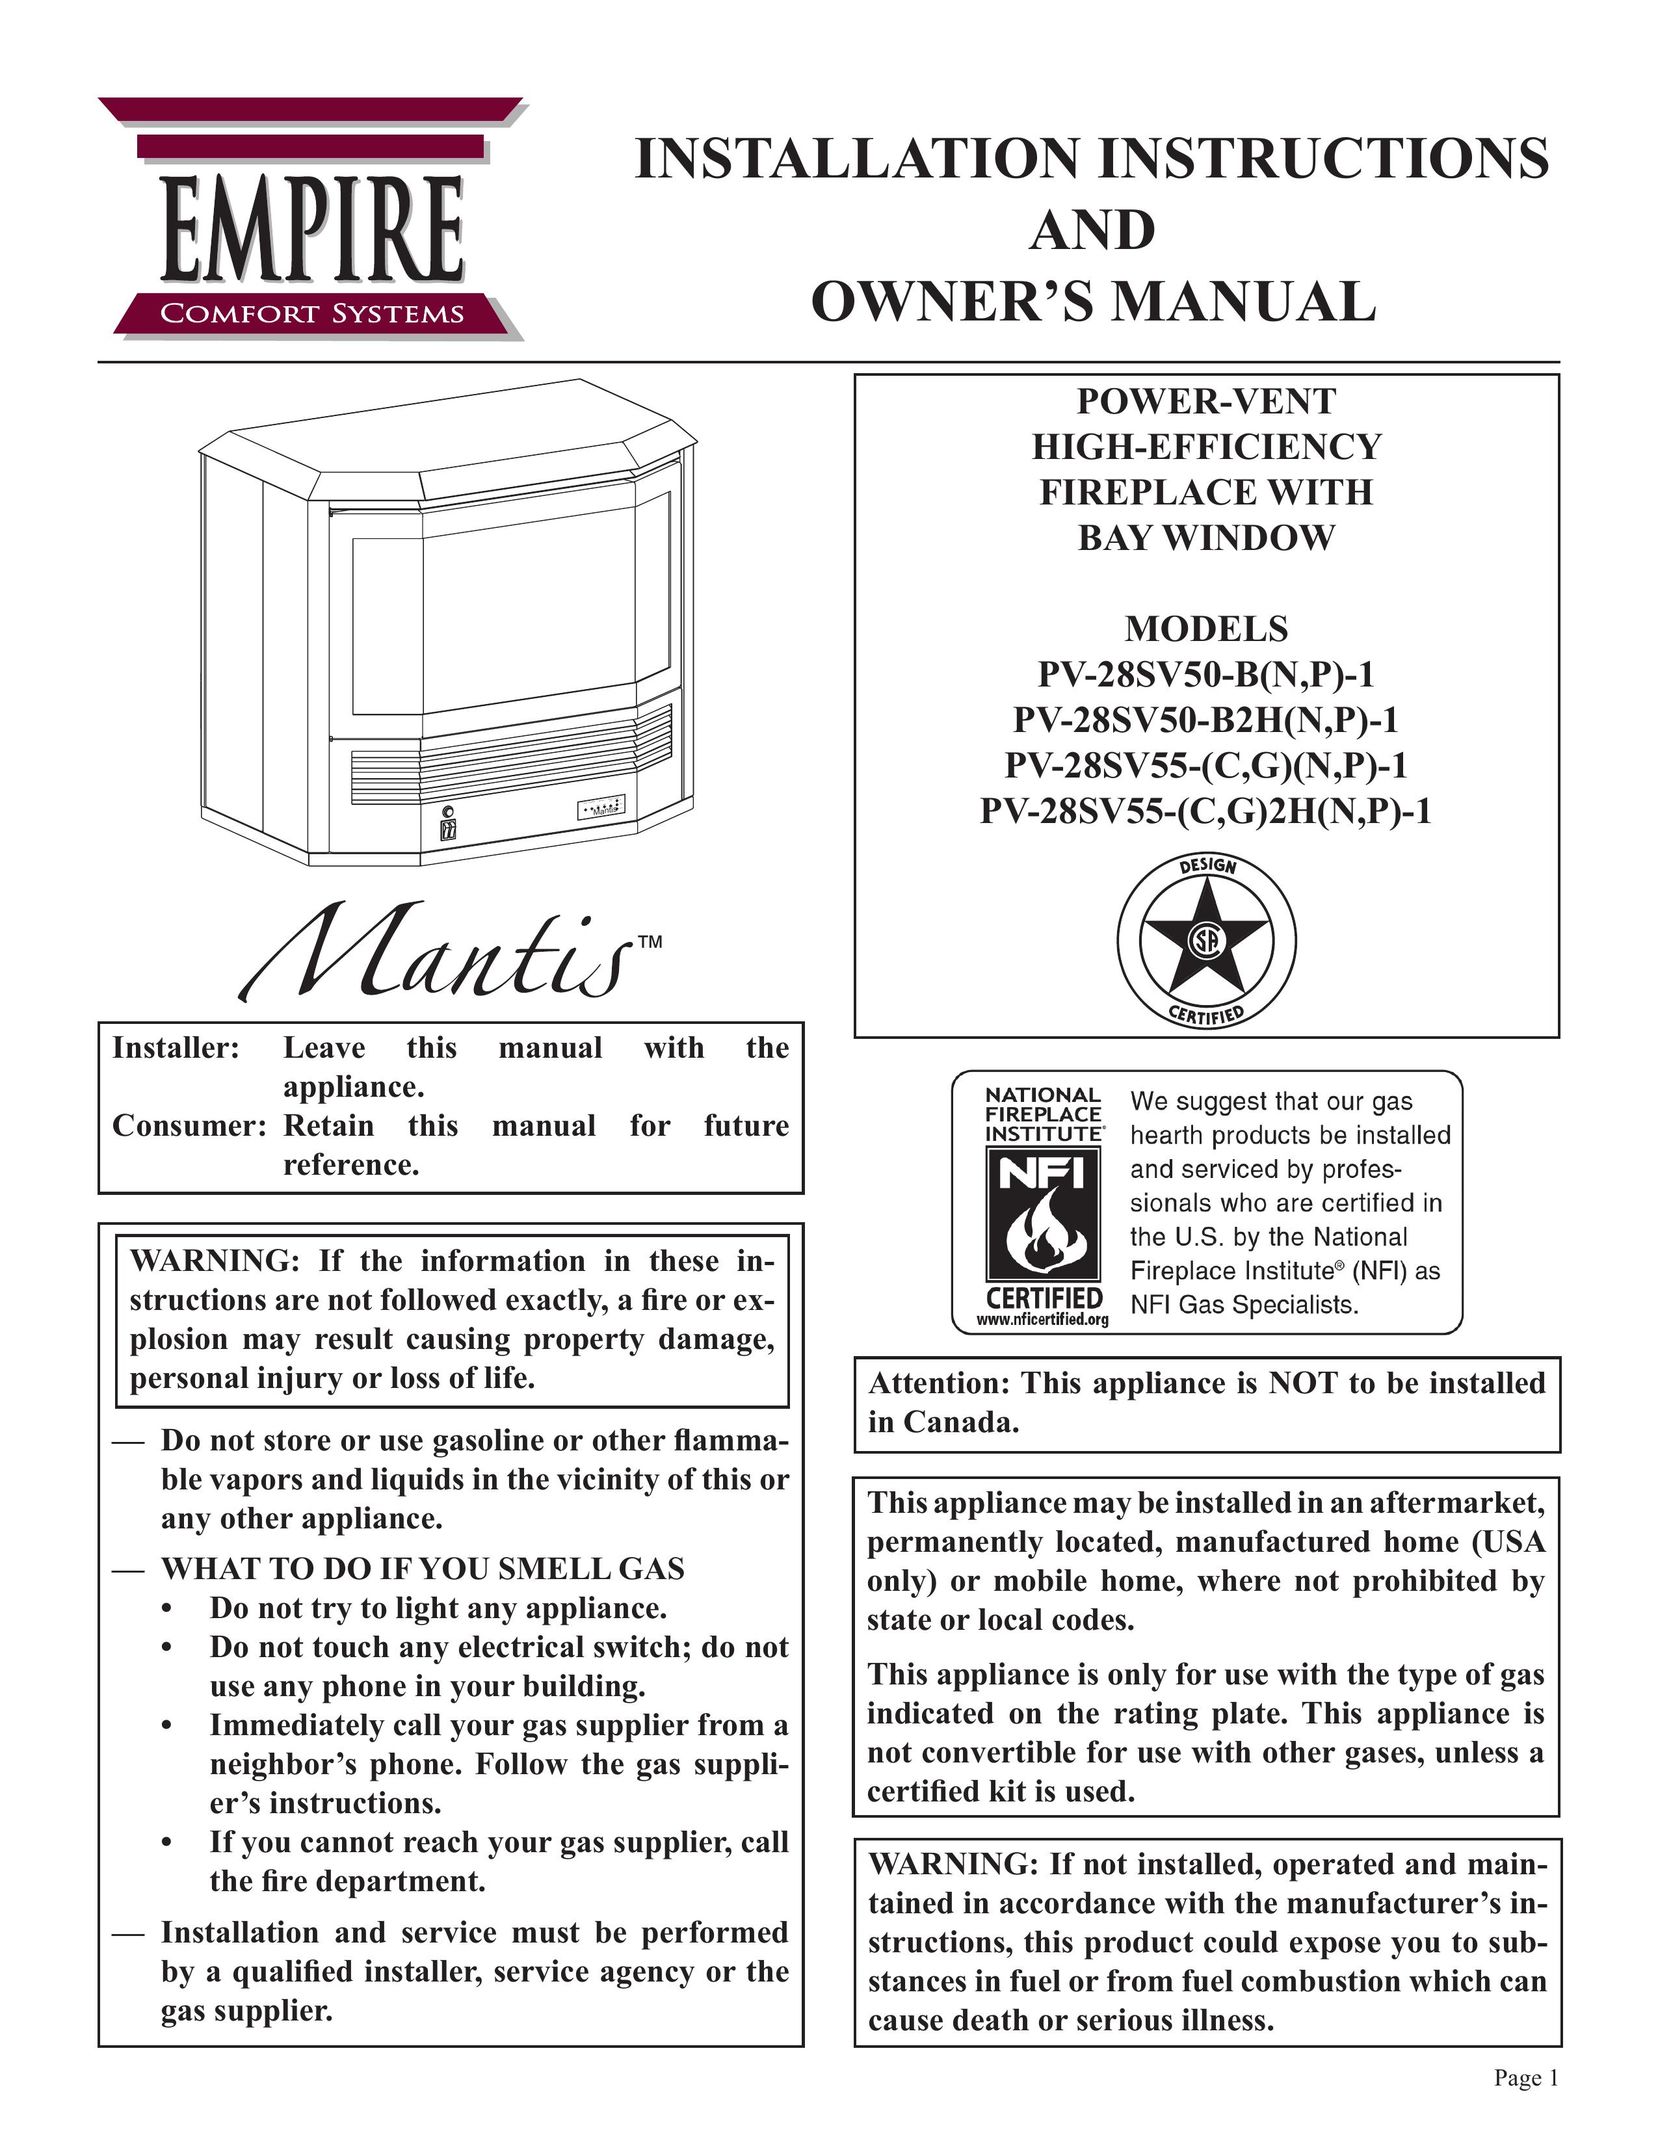 Empire Comfort Systems PV-28SV55-(C,G)2H(N,P)-1 Indoor Fireplace User Manual